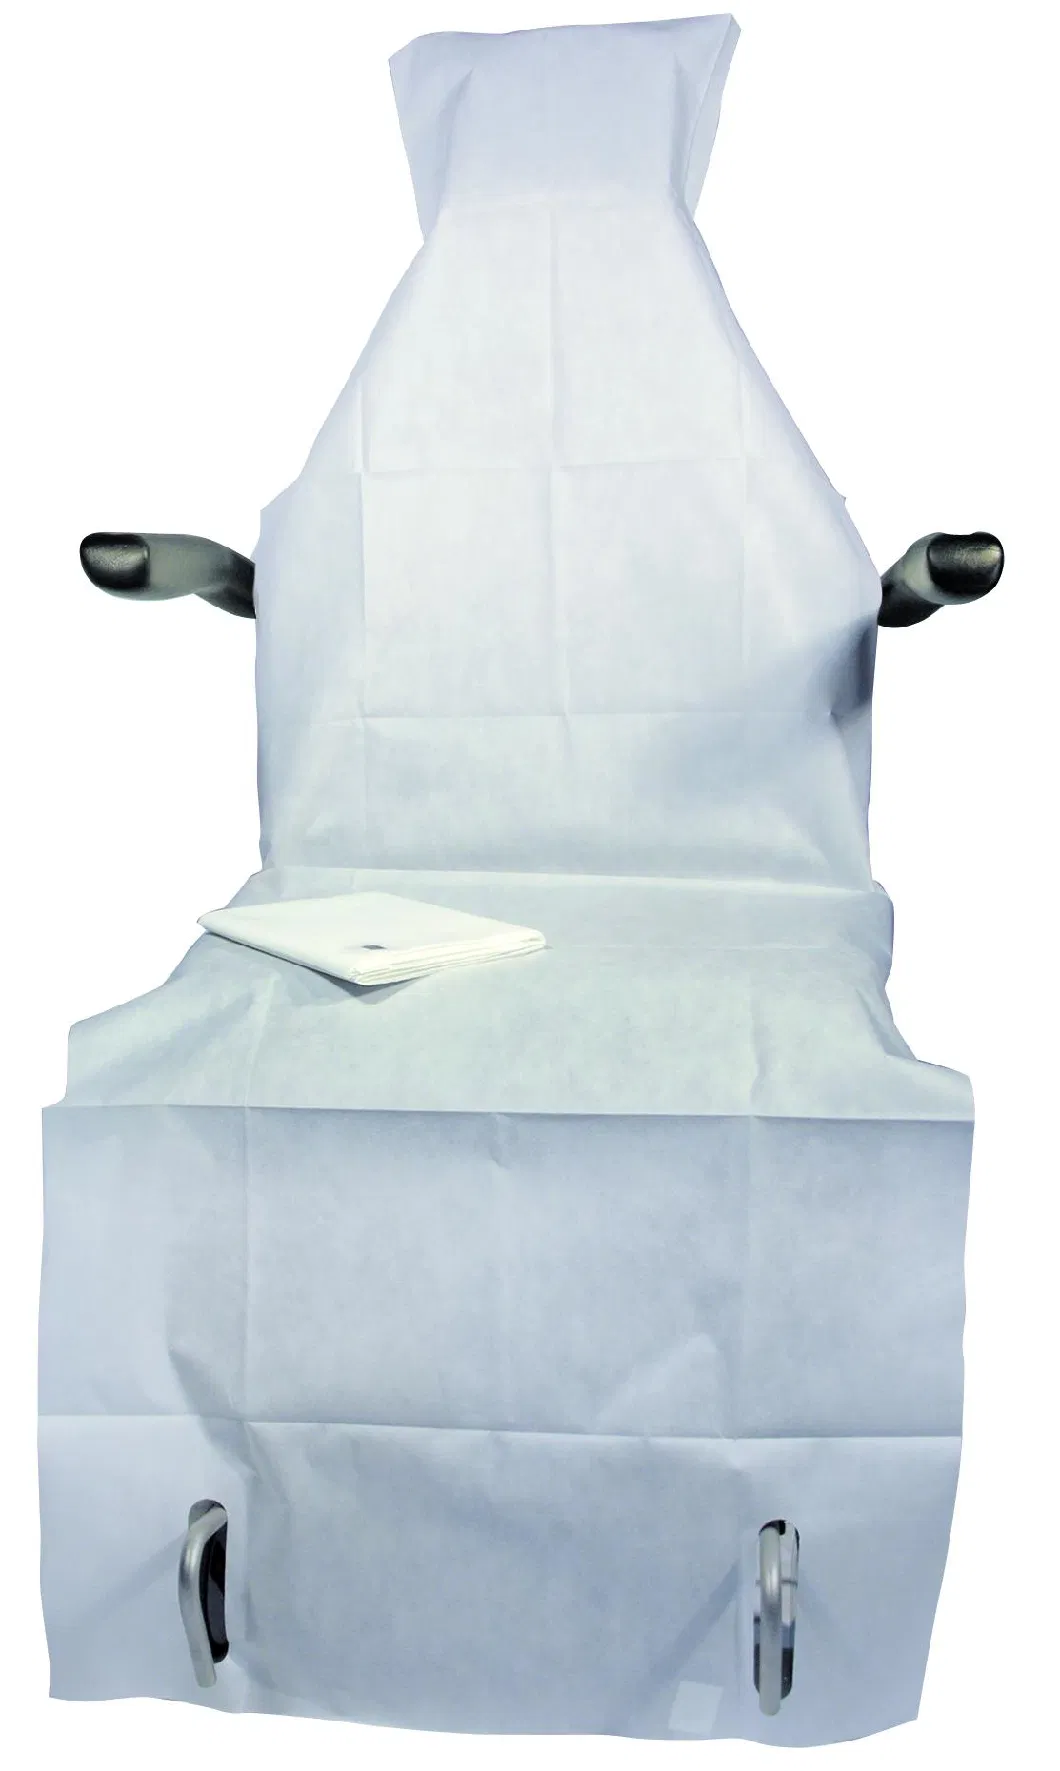 Disposable Universal Car Seat Cover Nonwoven Dental Chair Seat Cover